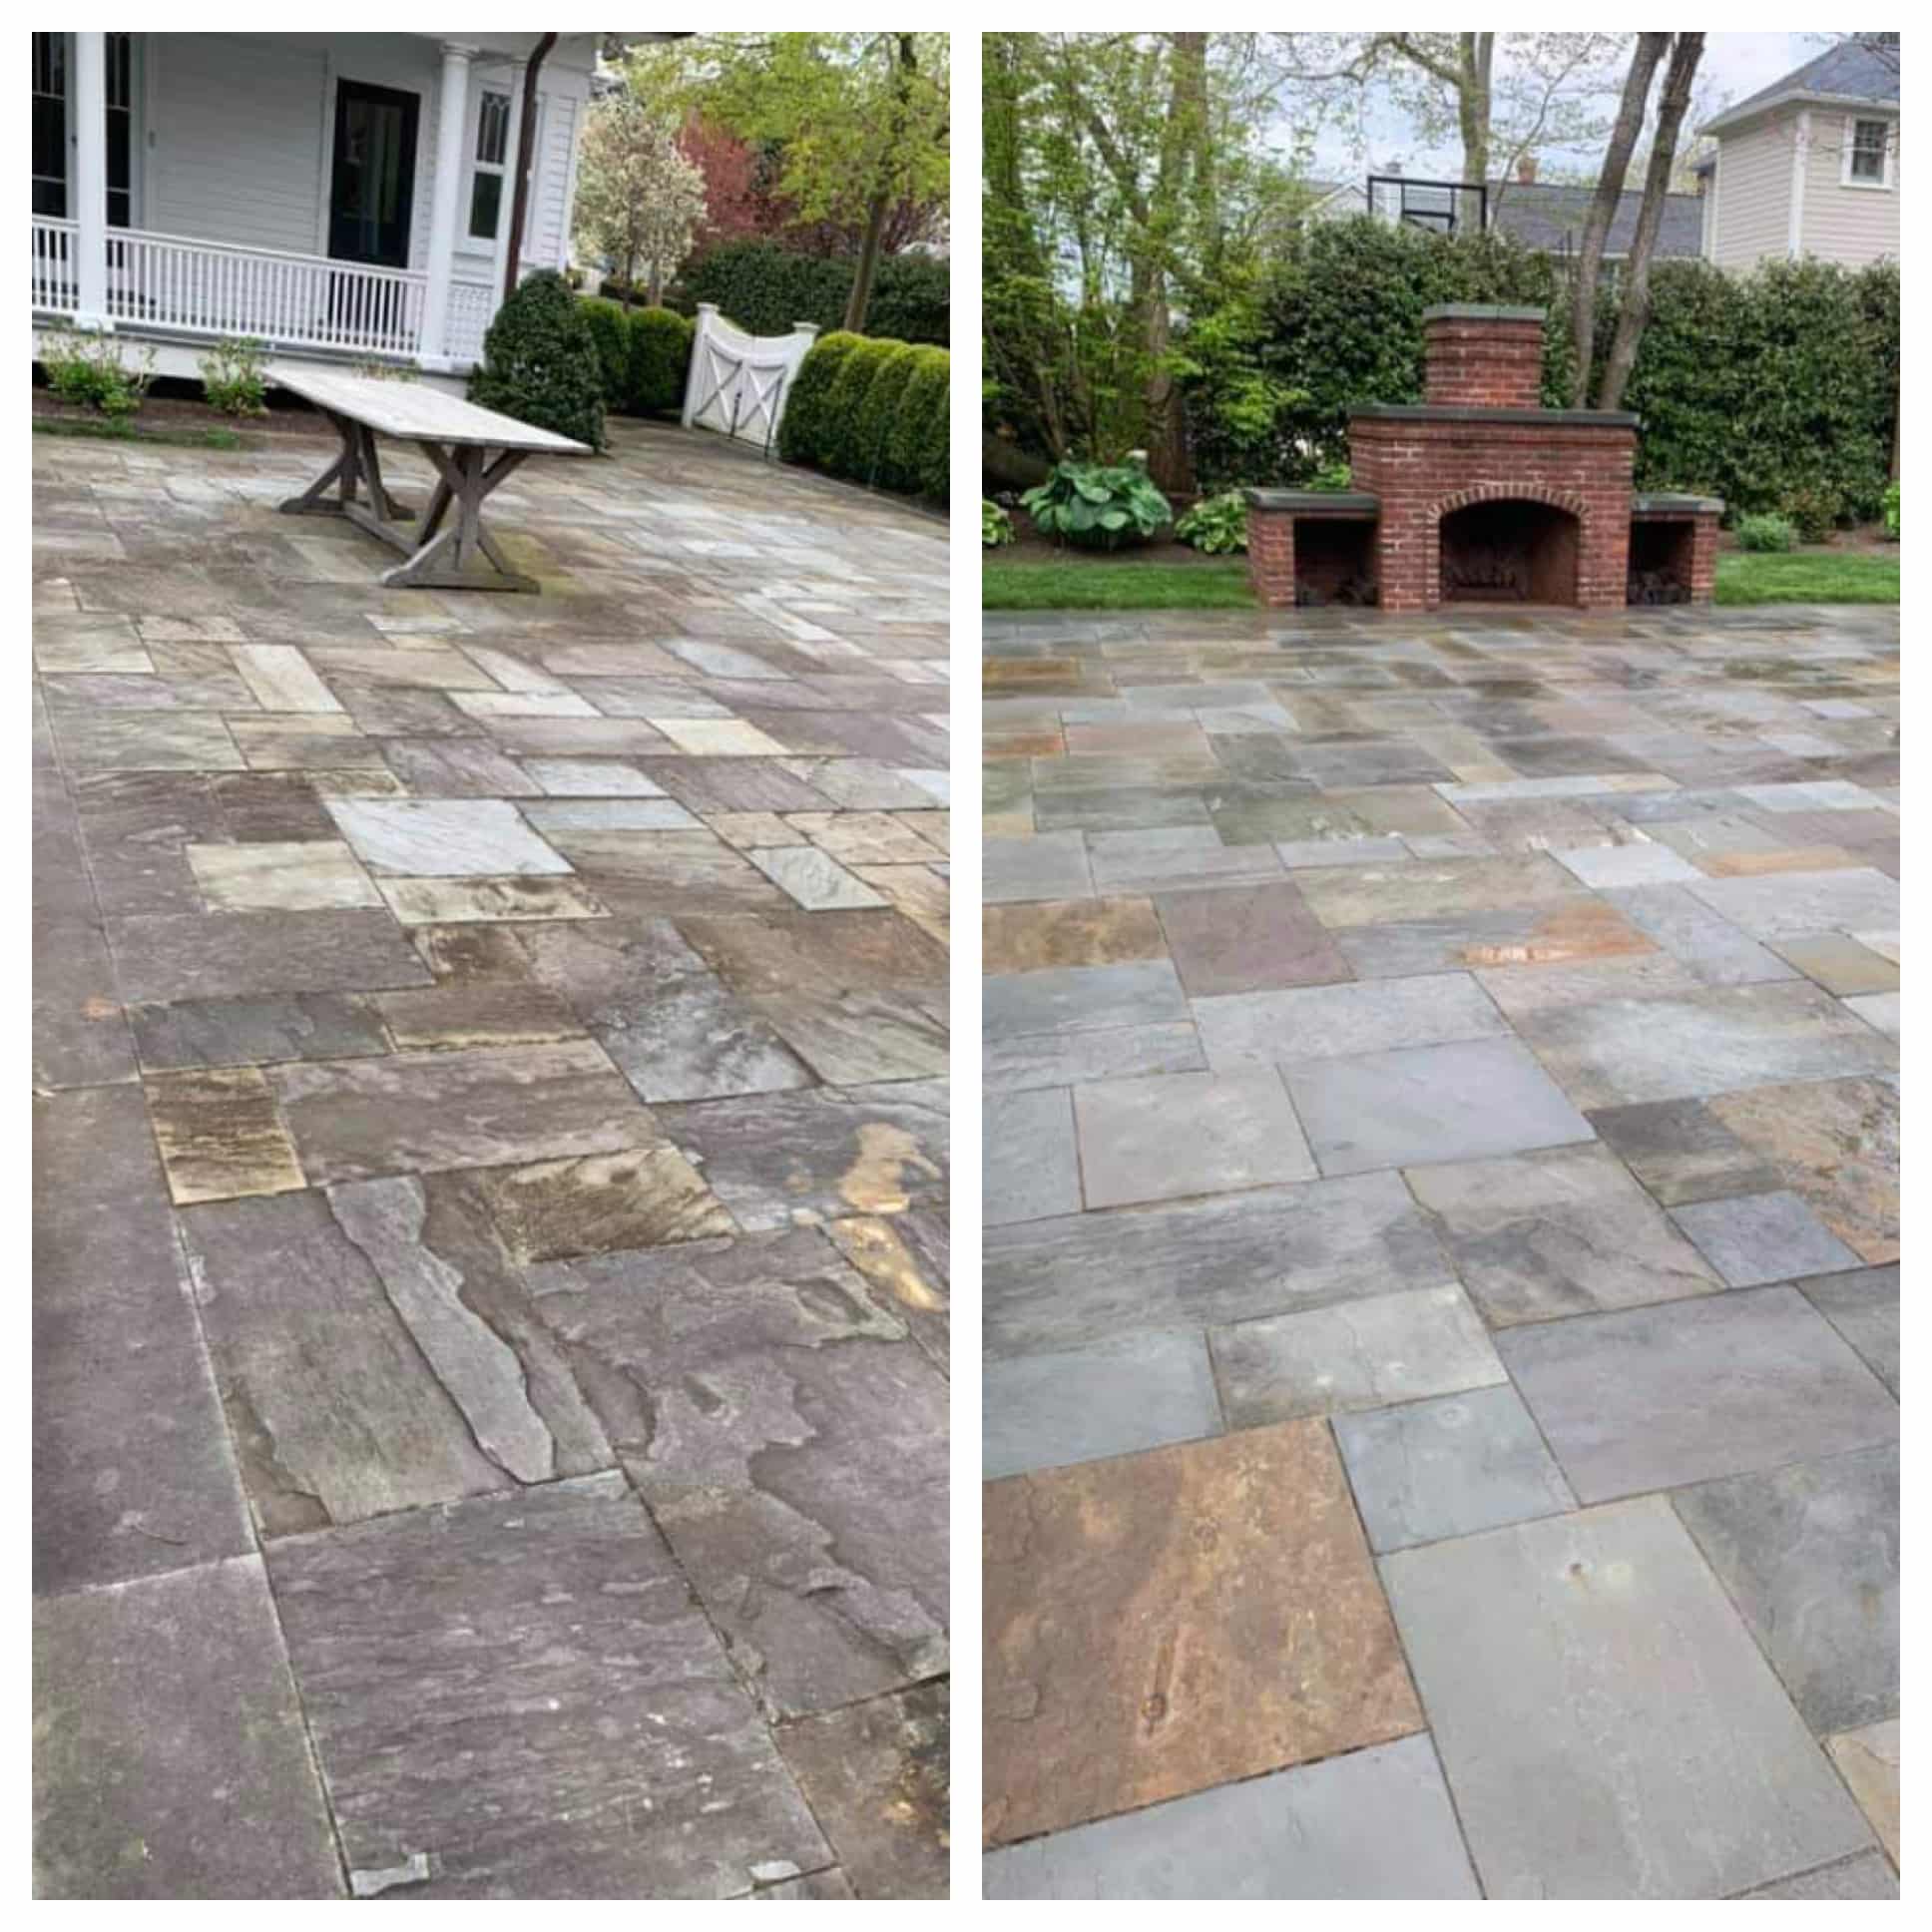 blue stone paver before and after power washing